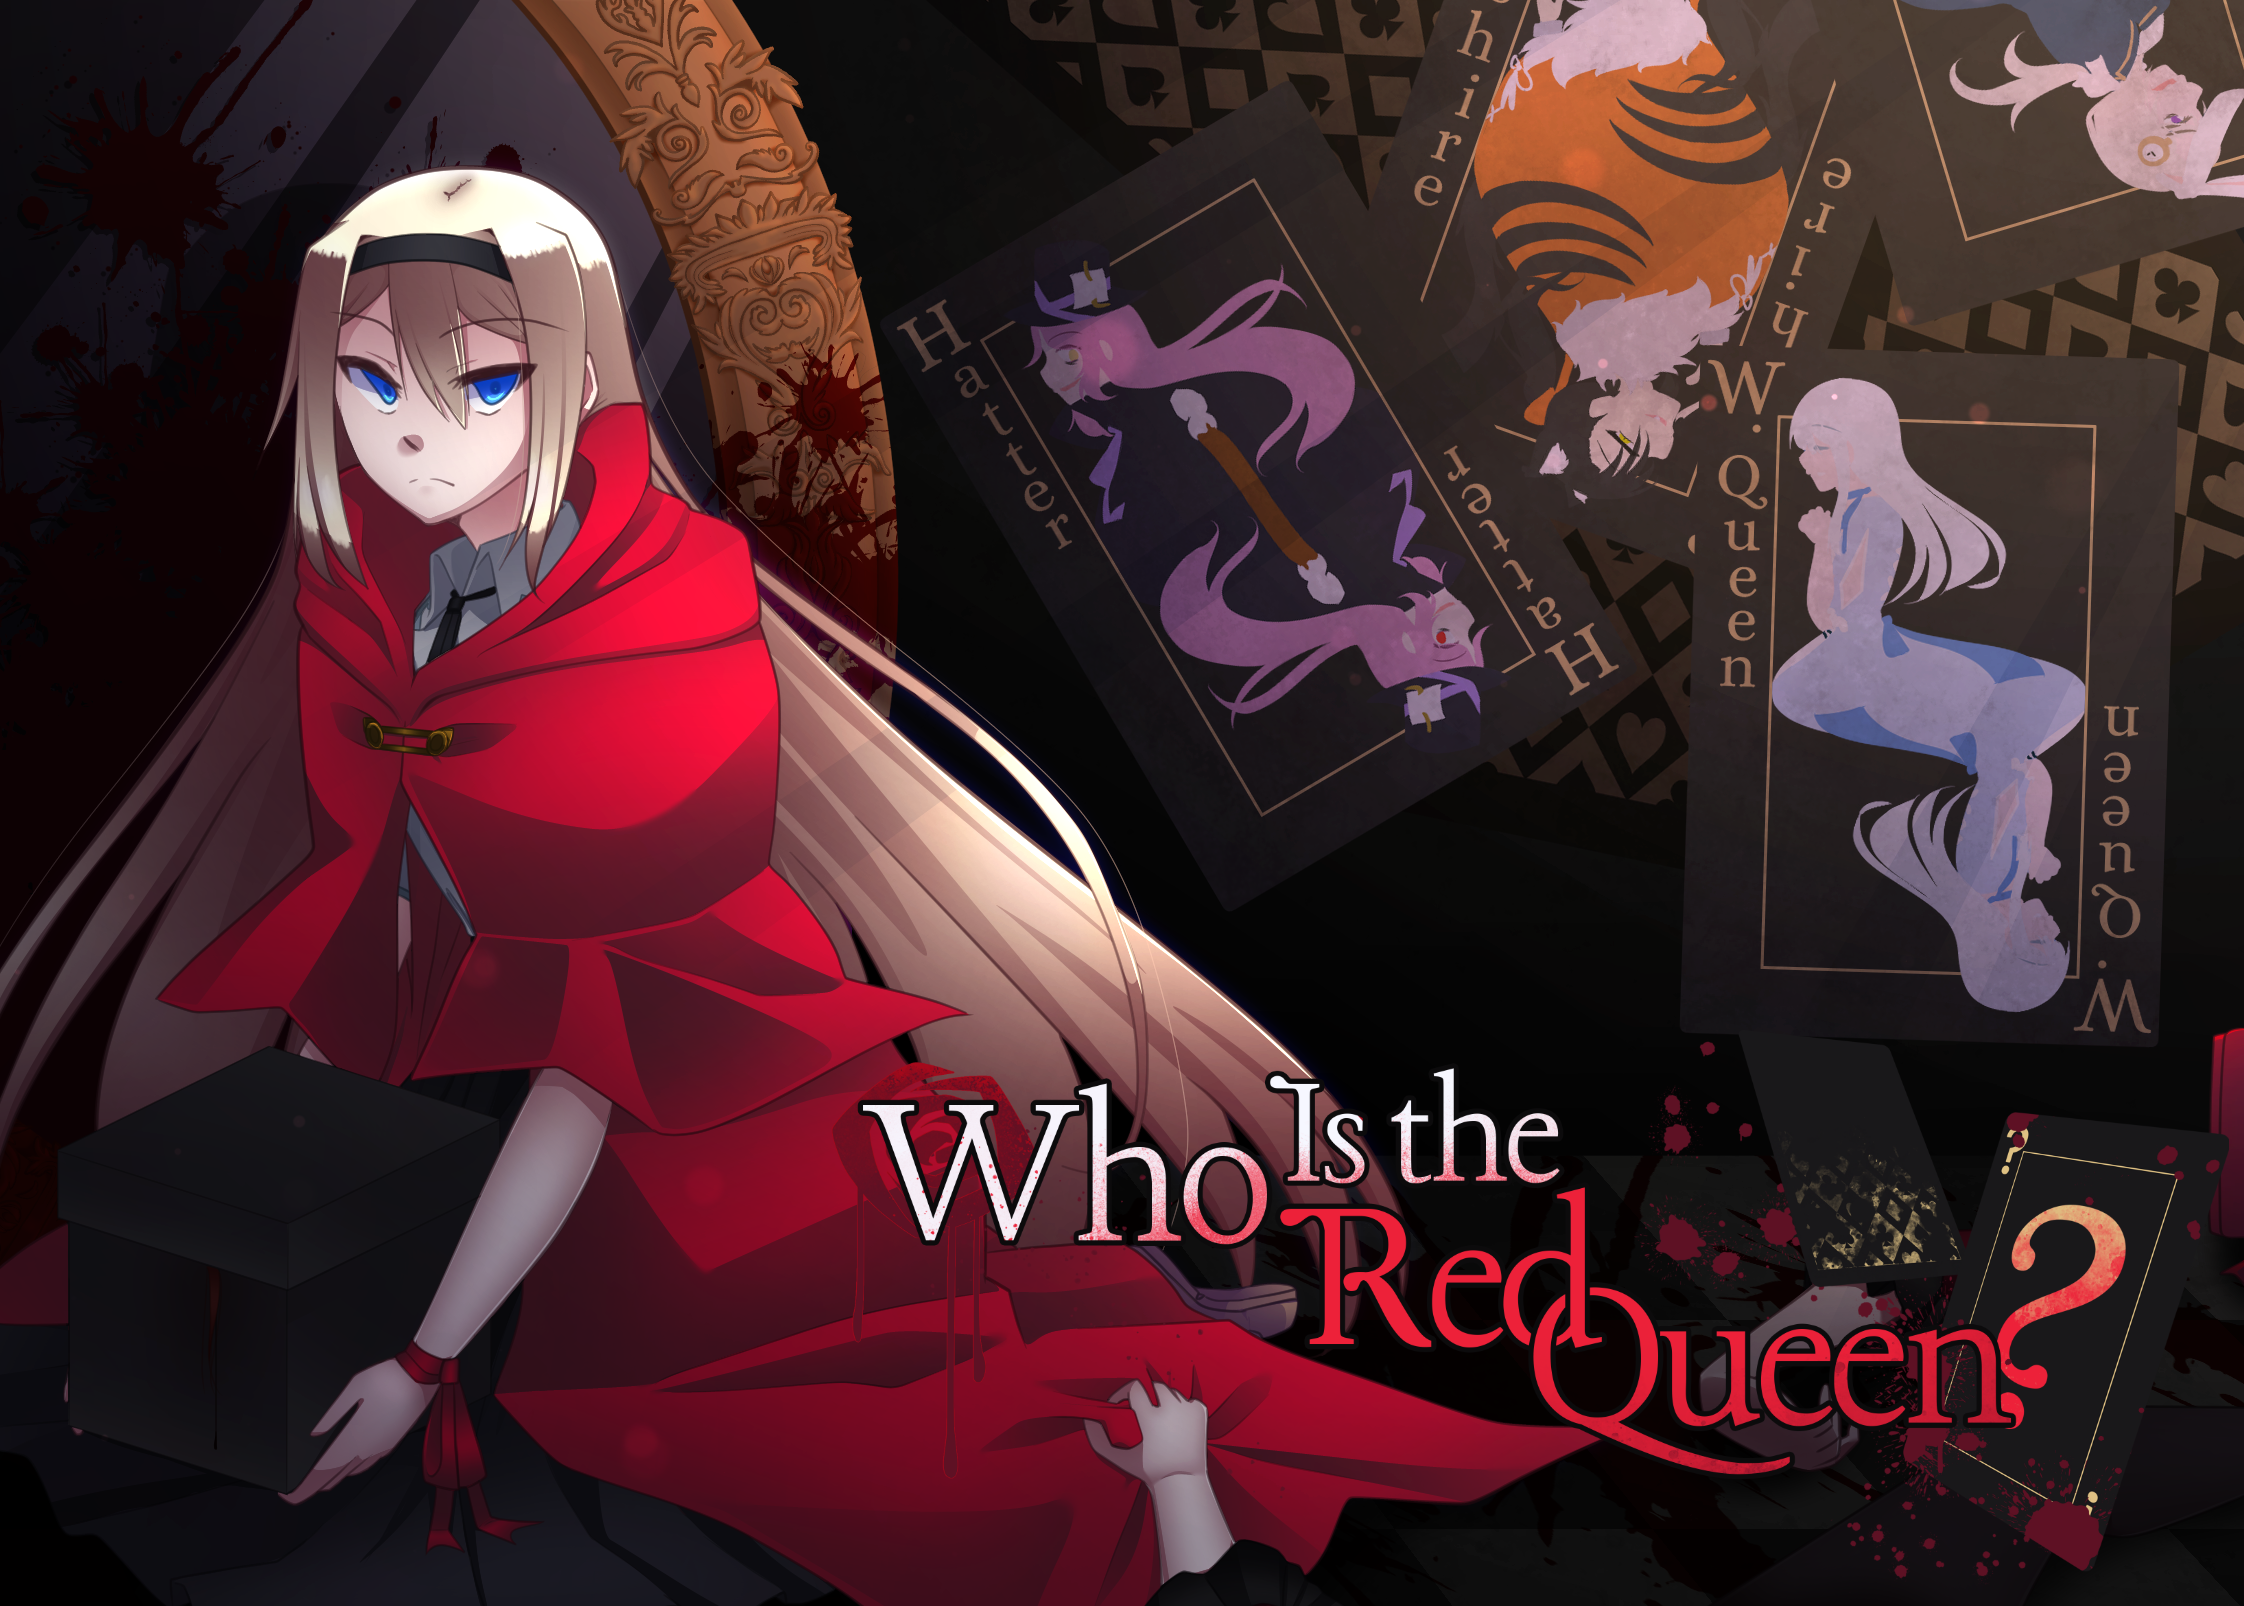 Who is the Red Queen?